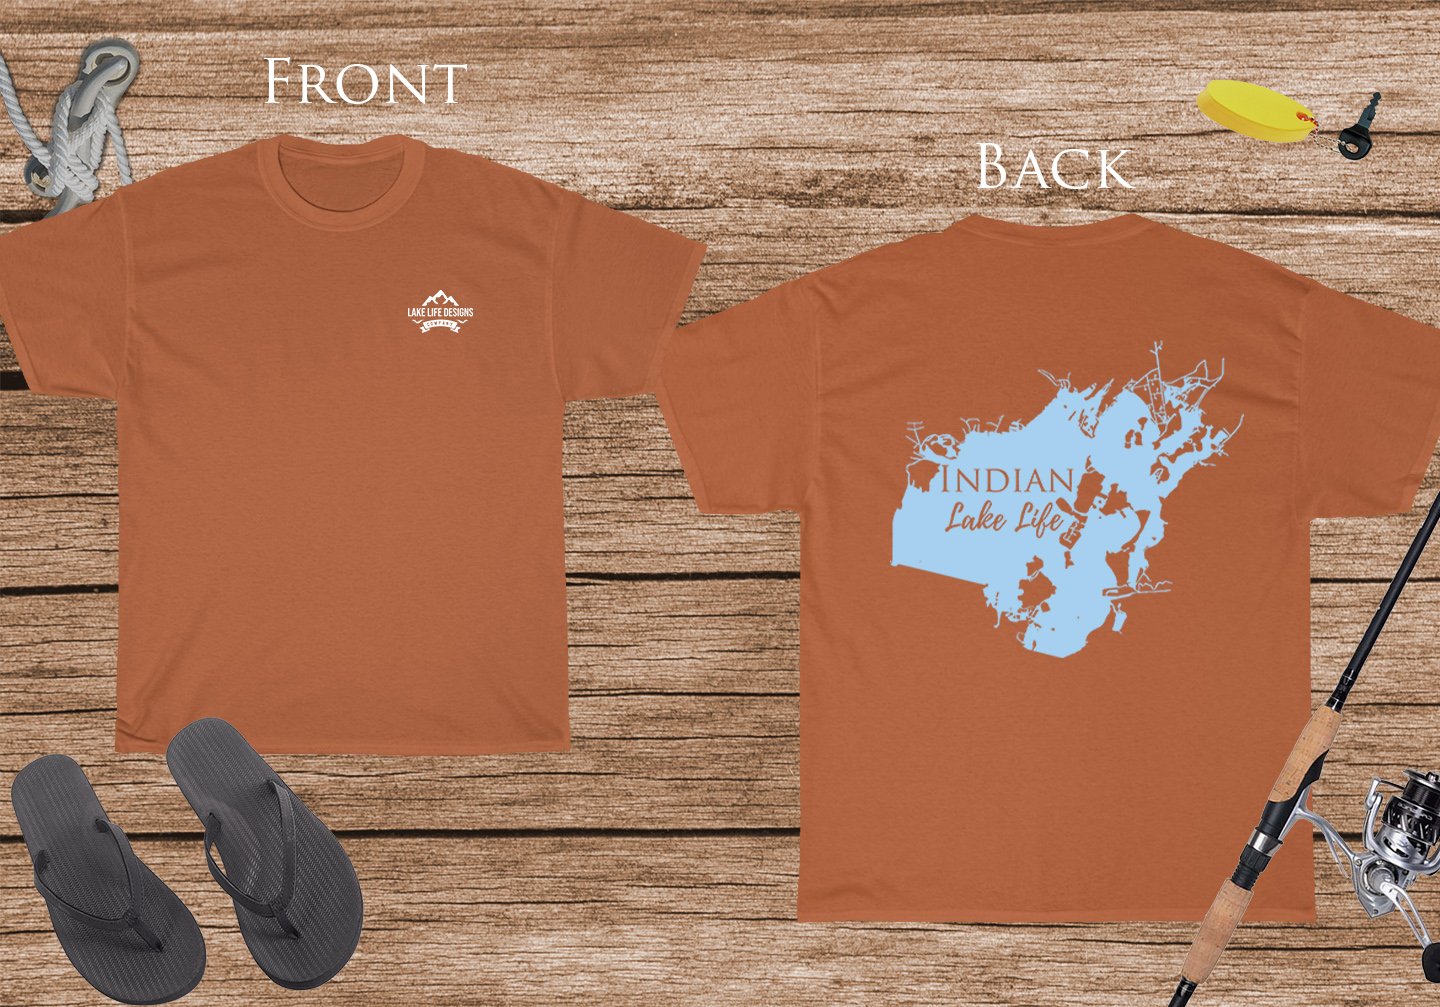 Indian Lake Life  - Cotton Short Sleeved - FRONT & BACK PRINTED - Short Sleeved Cotton Tee - Ohio Lake